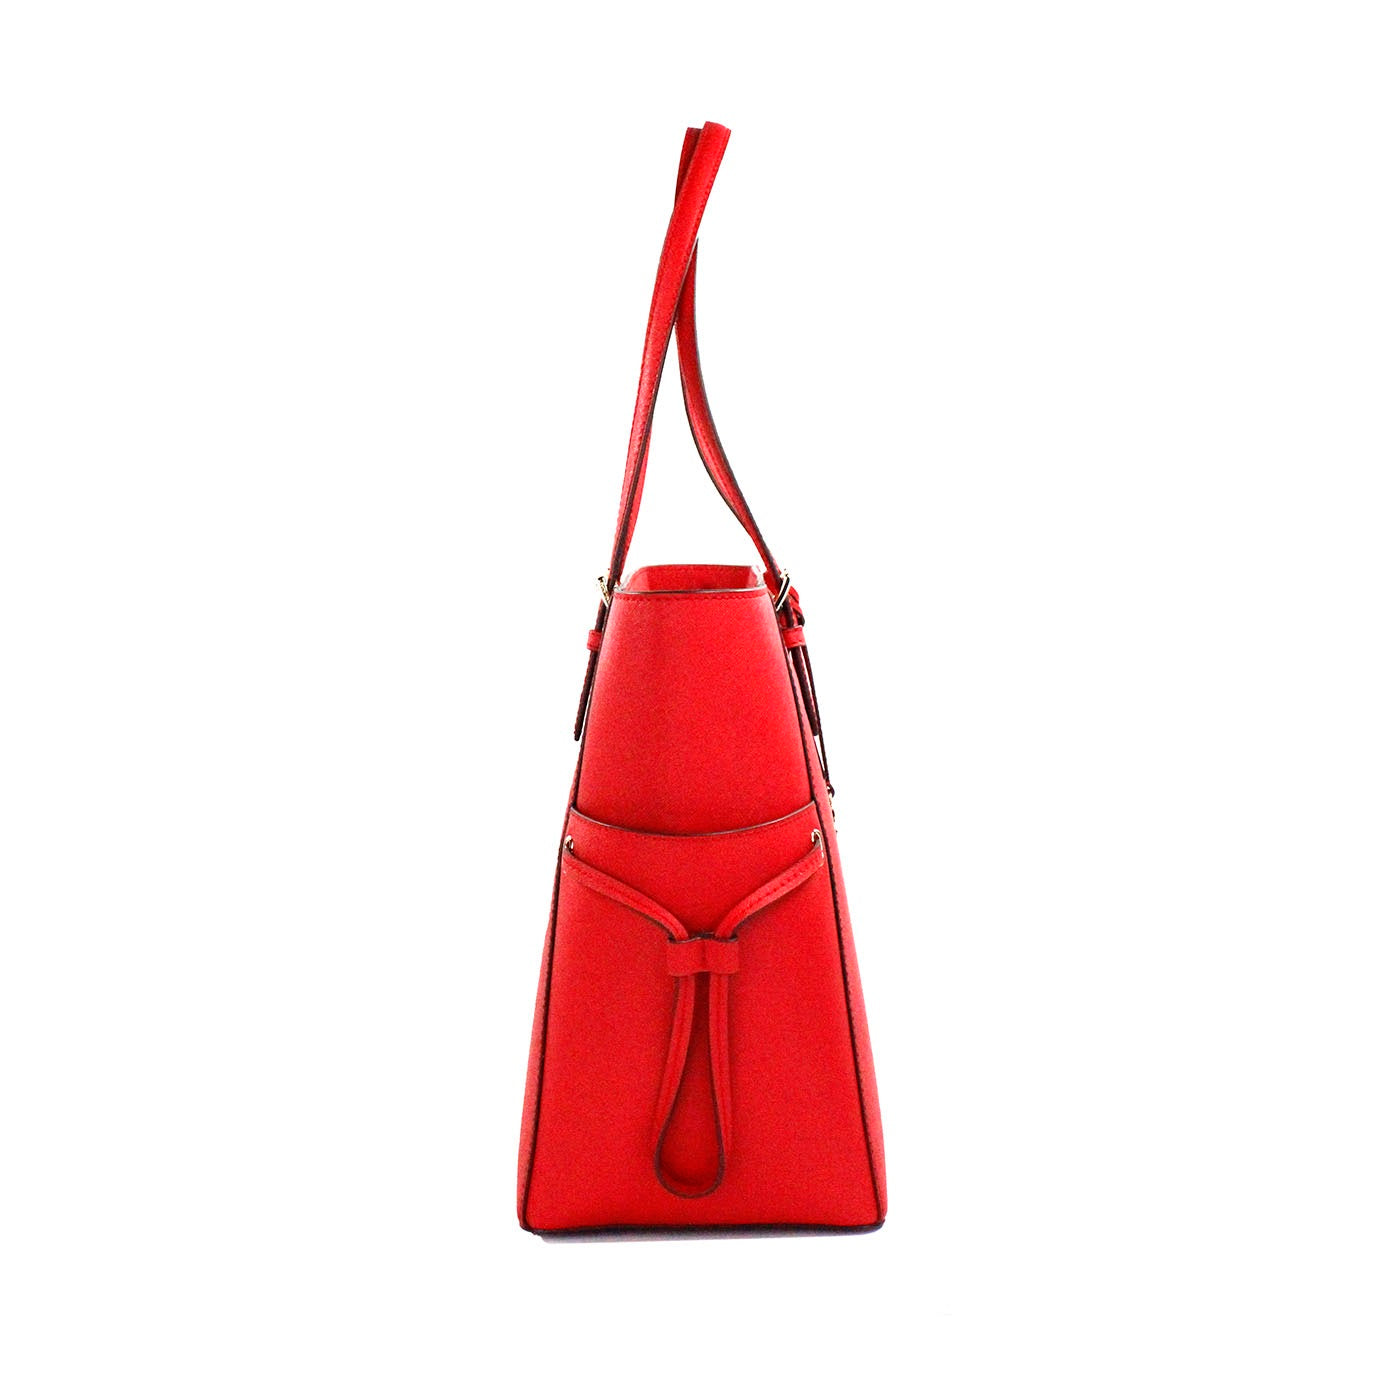 Michael Kors Gilly Large Bright Red Leather Drawstring Travel Tote Bag Purse | Fashionsarah.com